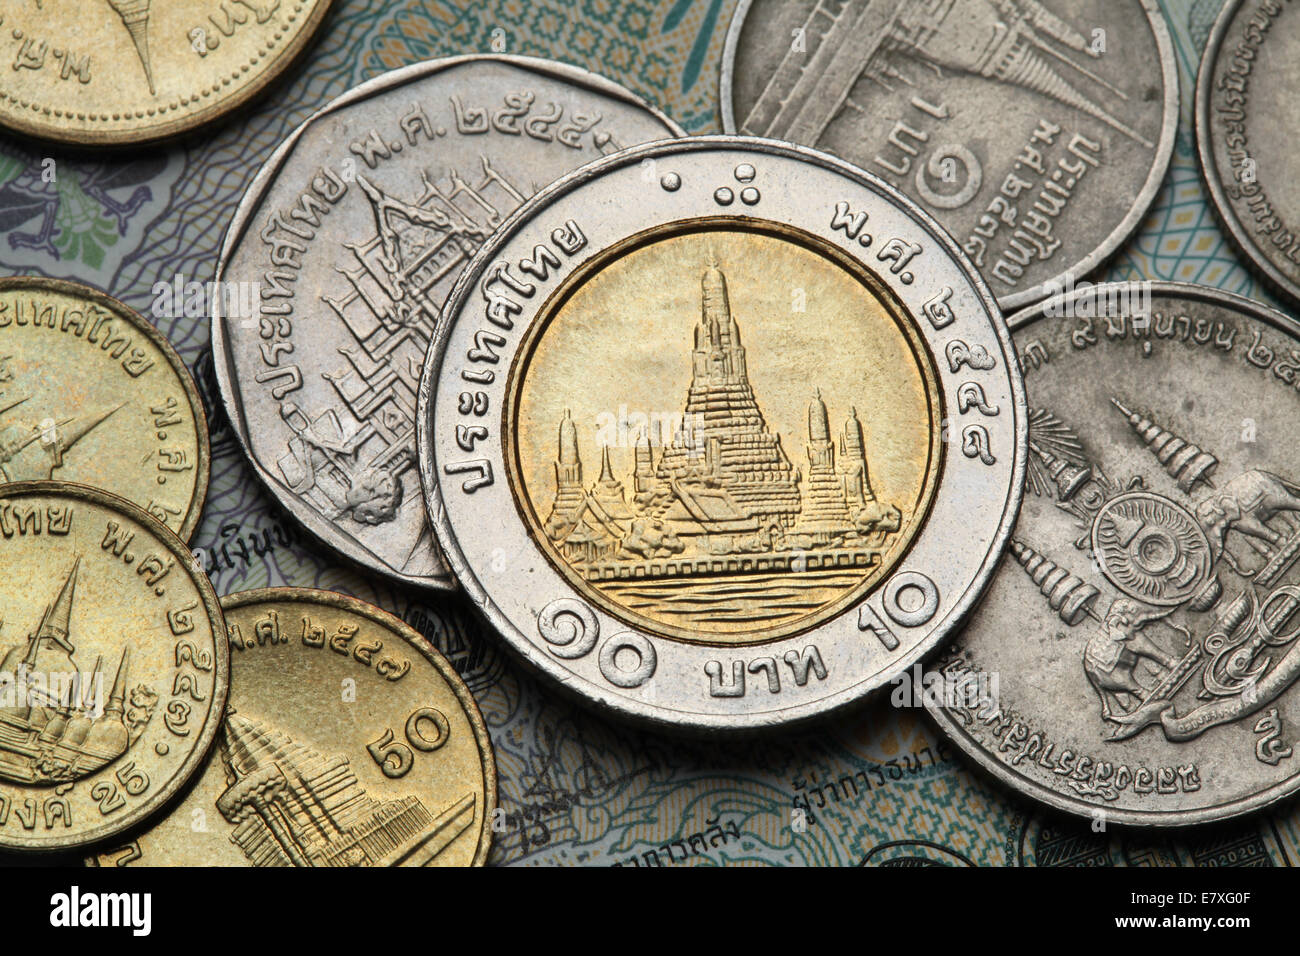 Coins of Thailand. Wat Arun Temple in Bangkok, Thailand, depicted in the Thai ten baht coin. Stock Photo